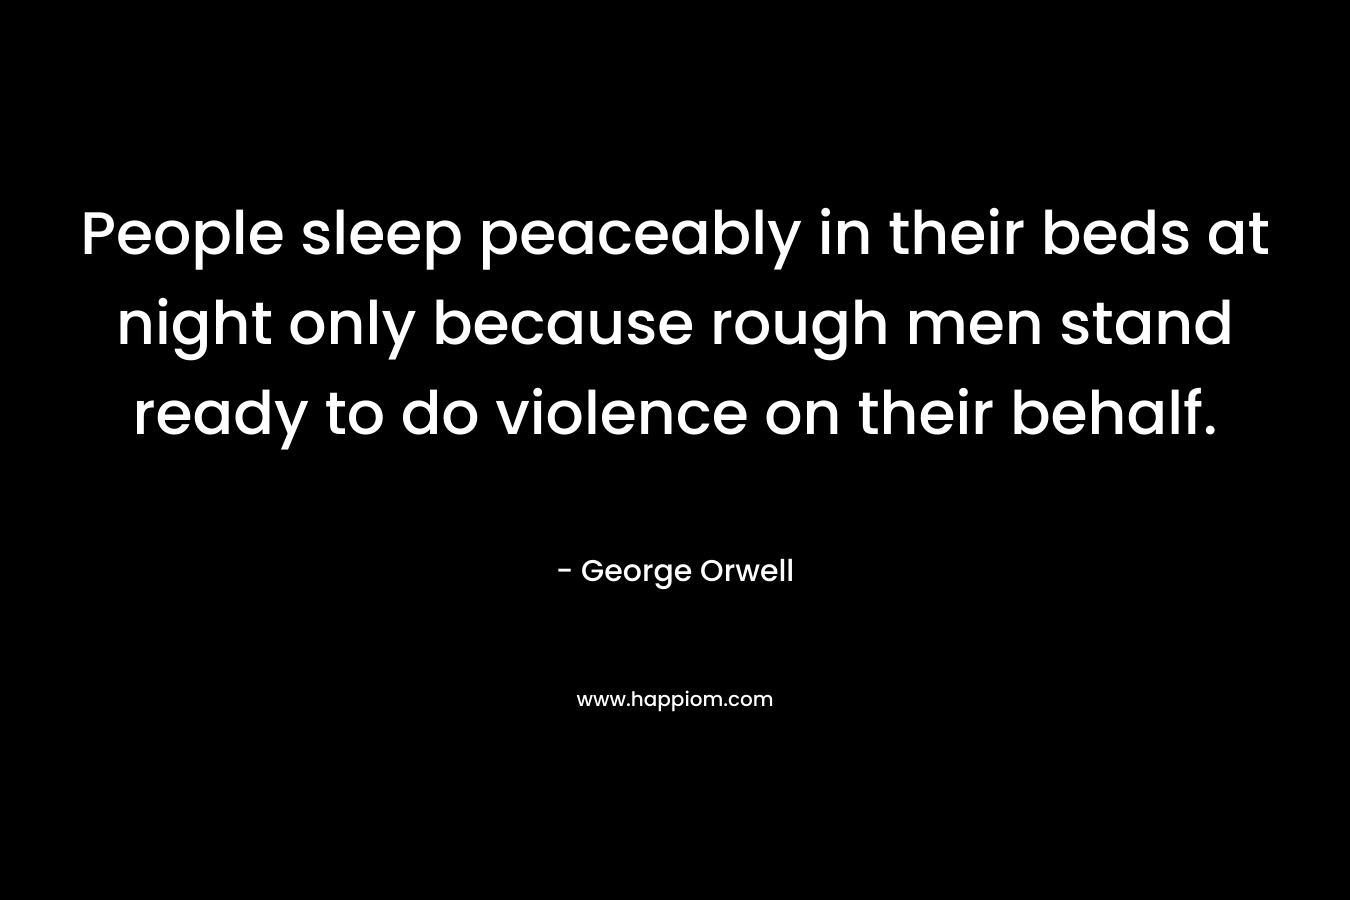 People sleep peaceably in their beds at night only because rough men stand ready to do violence on their behalf. – George Orwell